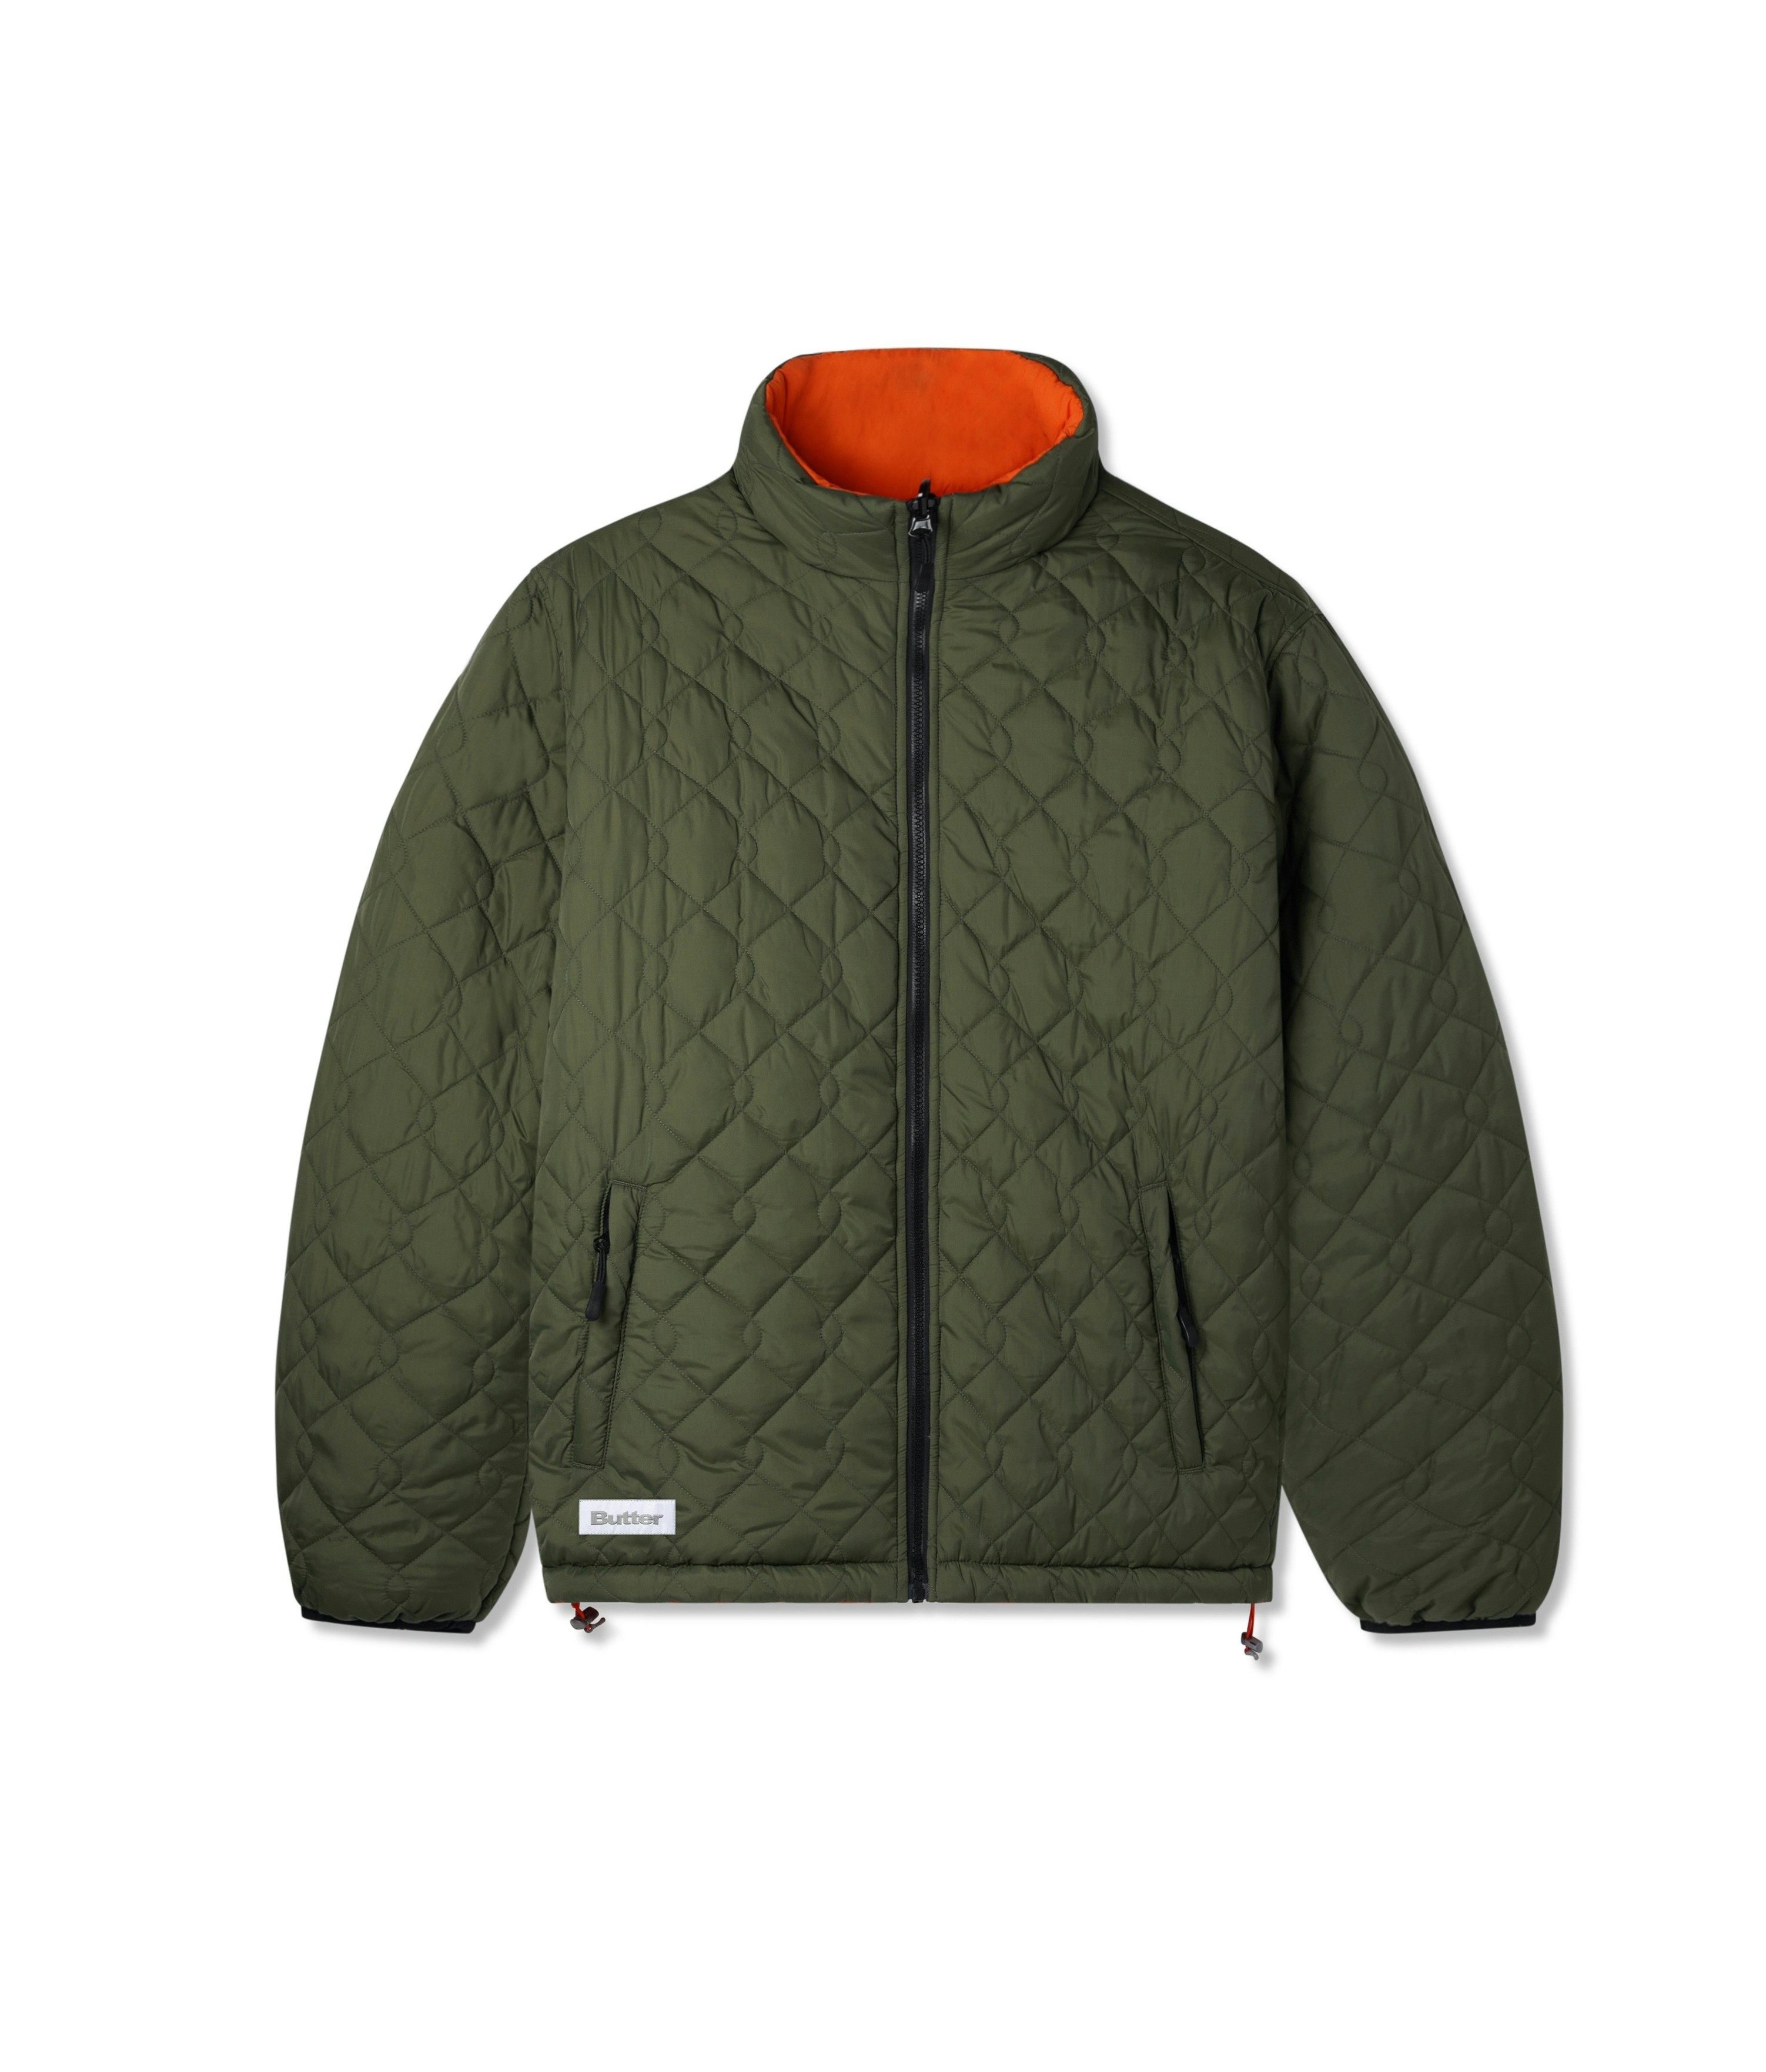 Butter Goods Chainlink Reversible Puffer Jacket Army/Orange 1